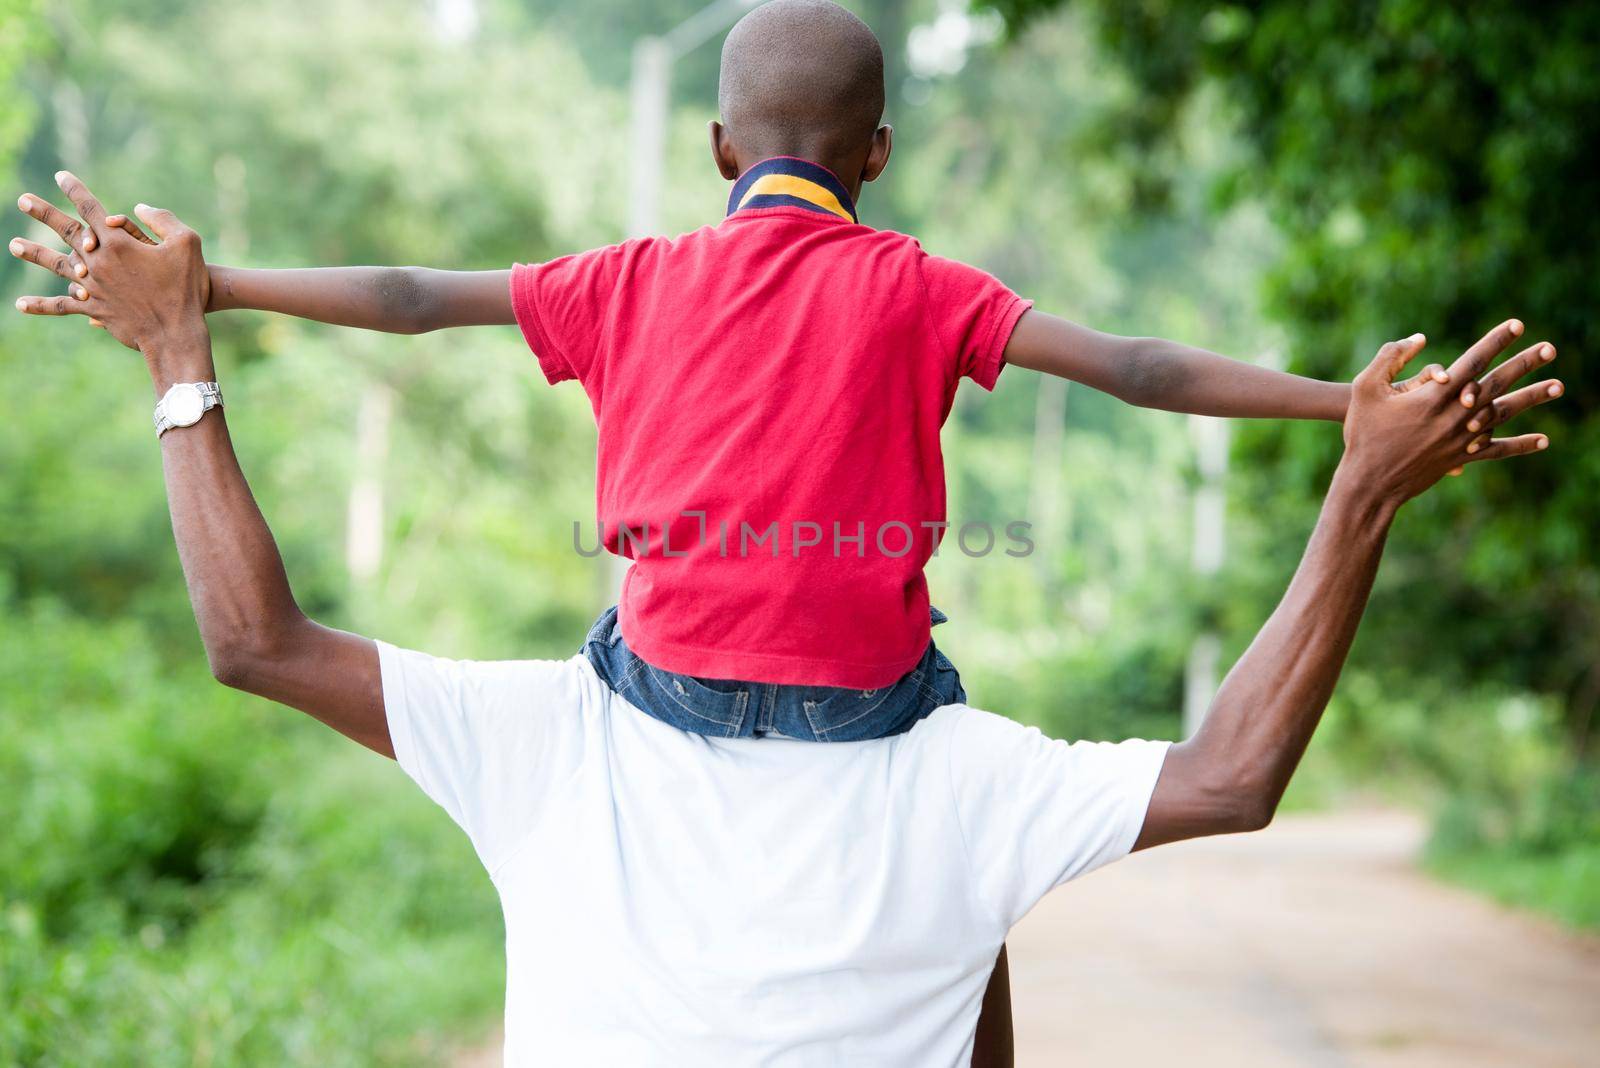 fathers Day. Father and child playing together outdoors on a road in nature